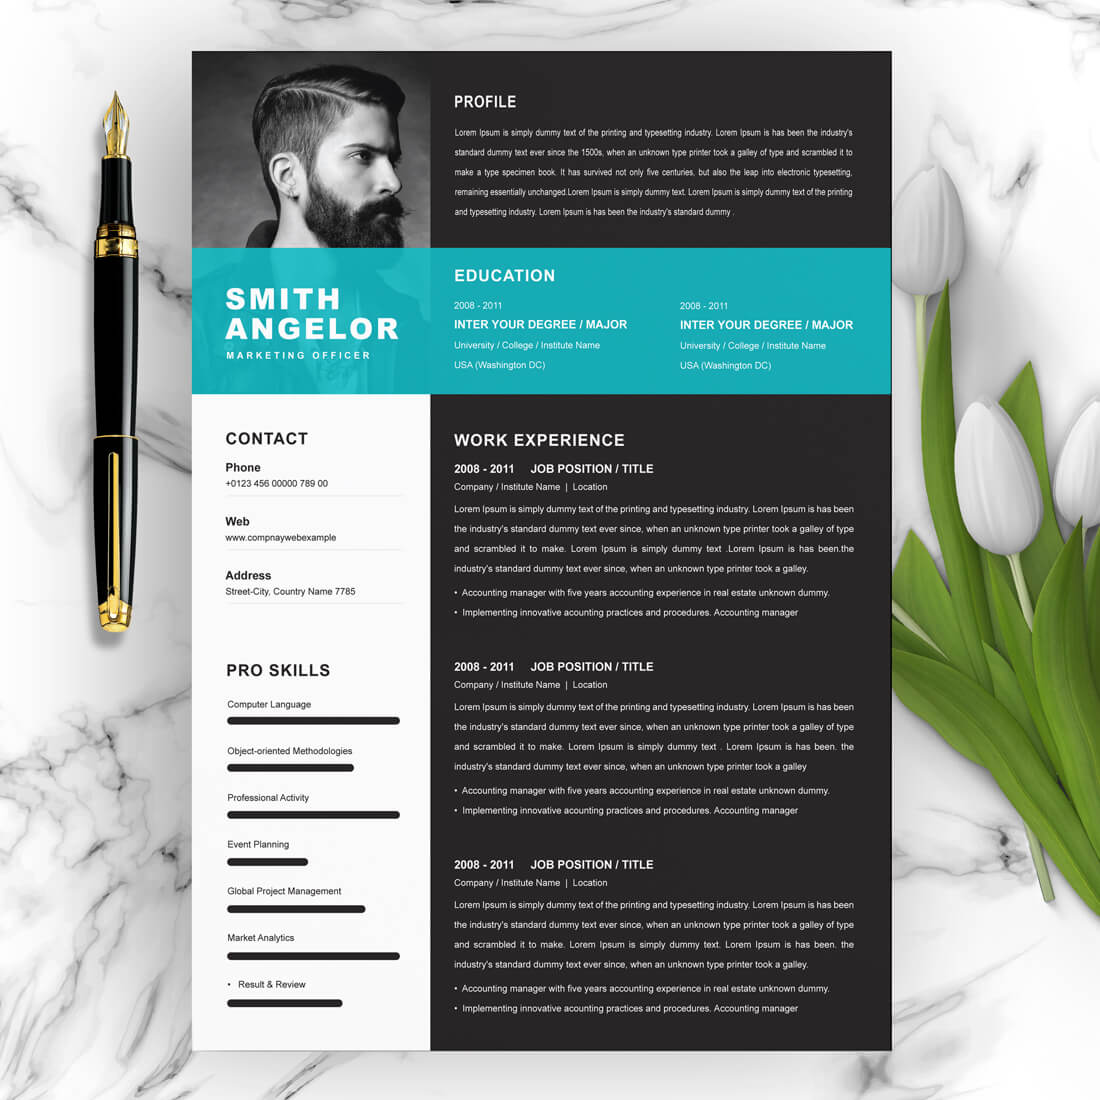 Marketing Officer Resume Template main cover.